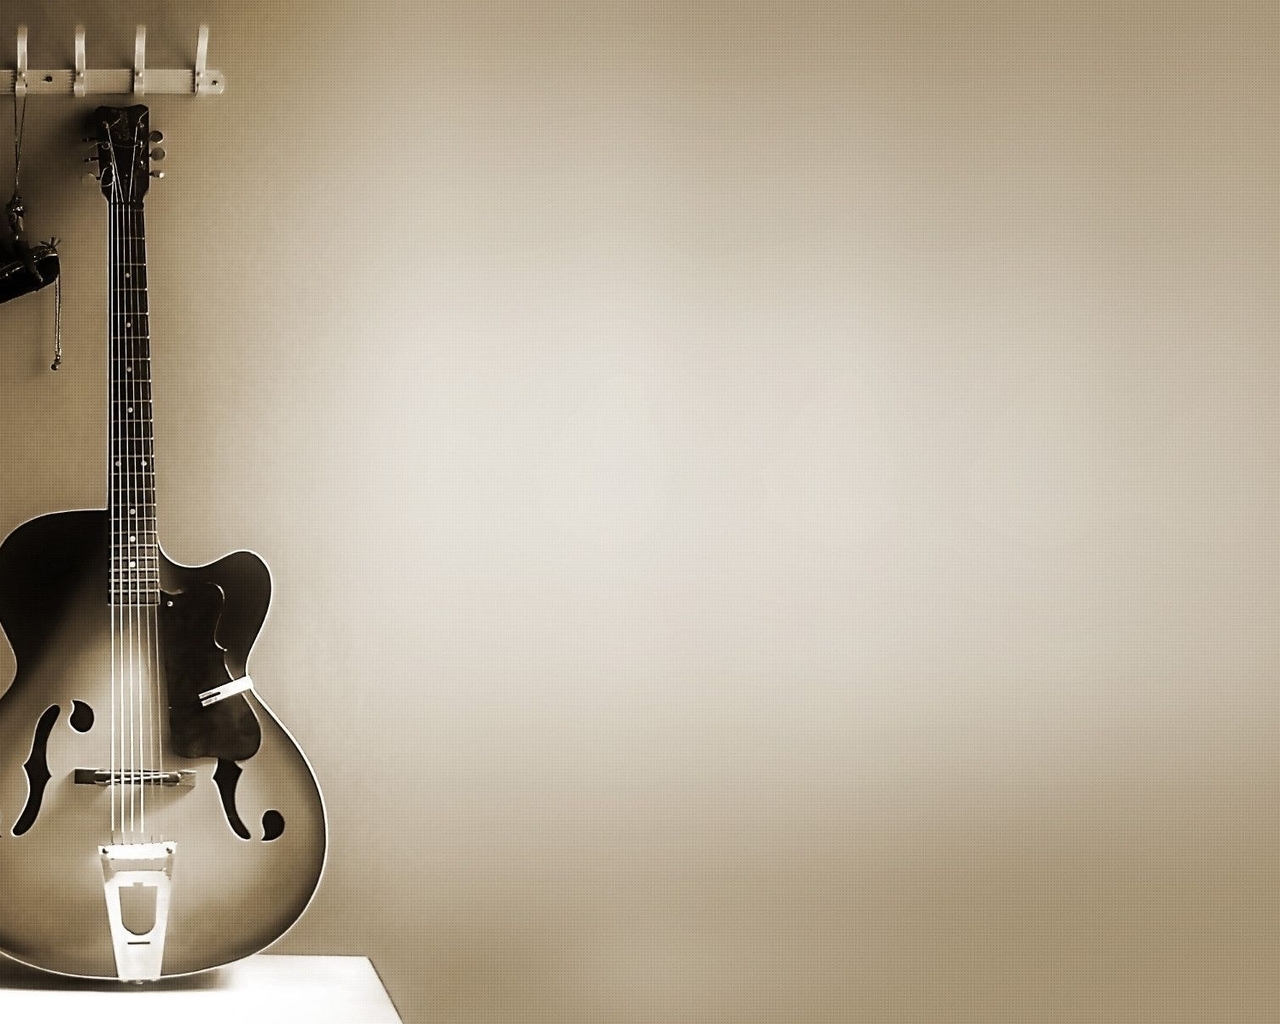 Image: Guitars, strings, wall, grey background